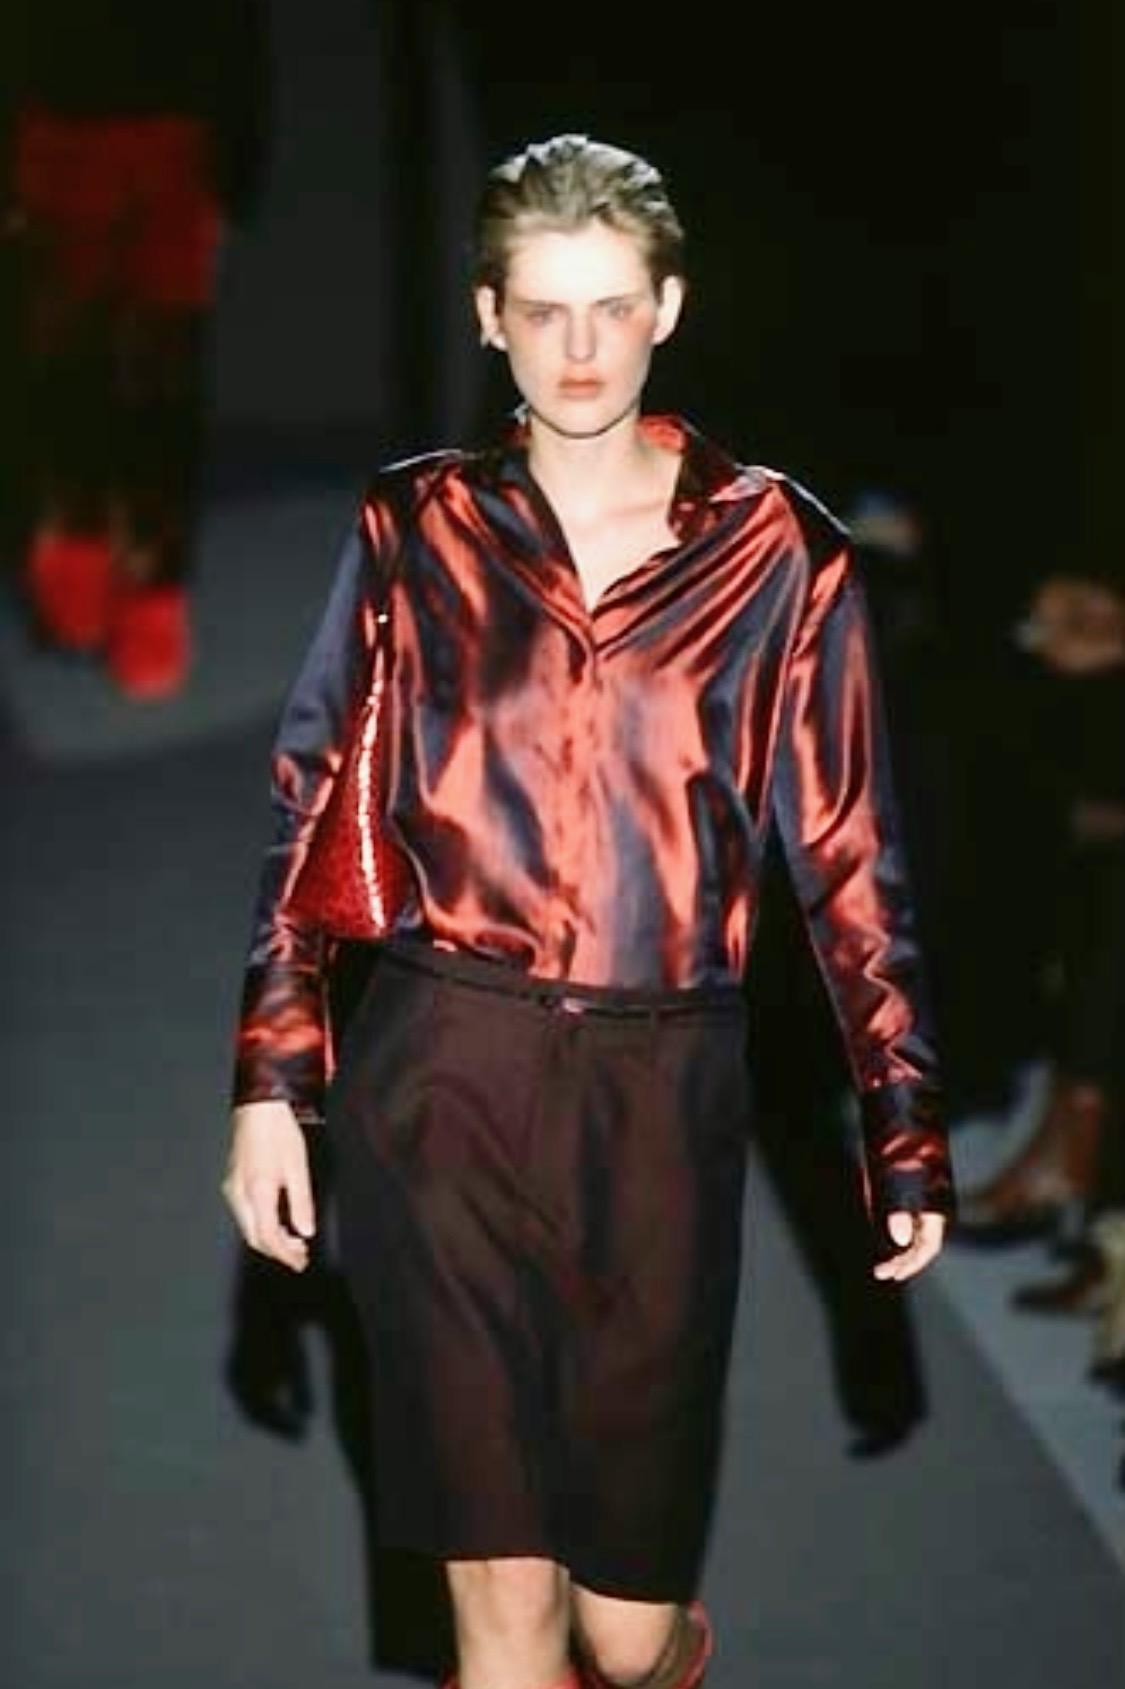 Presenting a fiery red iridescent Gucci silk button-up shirt, designed by Tom Ford. From the Fall/Winter 1997 collection, this top was featured on the season's runway in multiple color variations and is one of Ford's more notable pieces during his